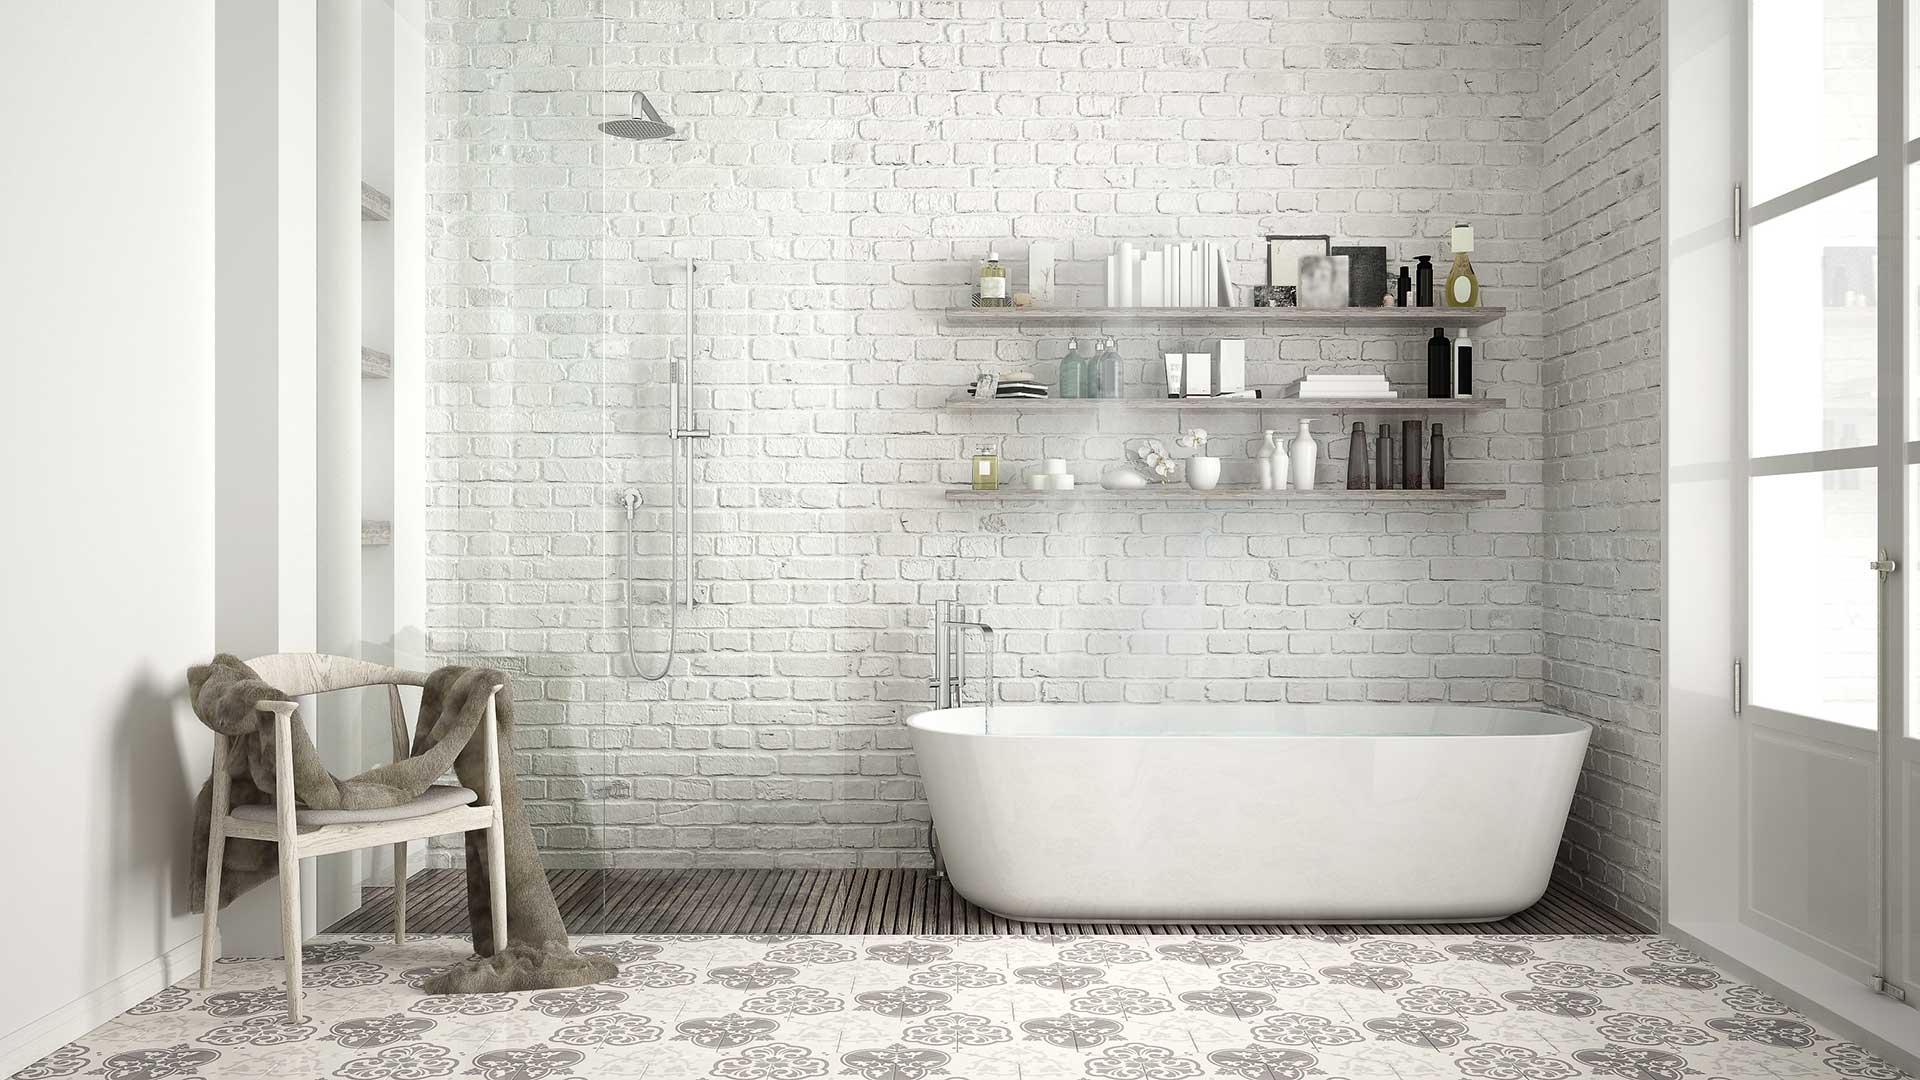 Beautiful bathroom with exposed brick in white colour